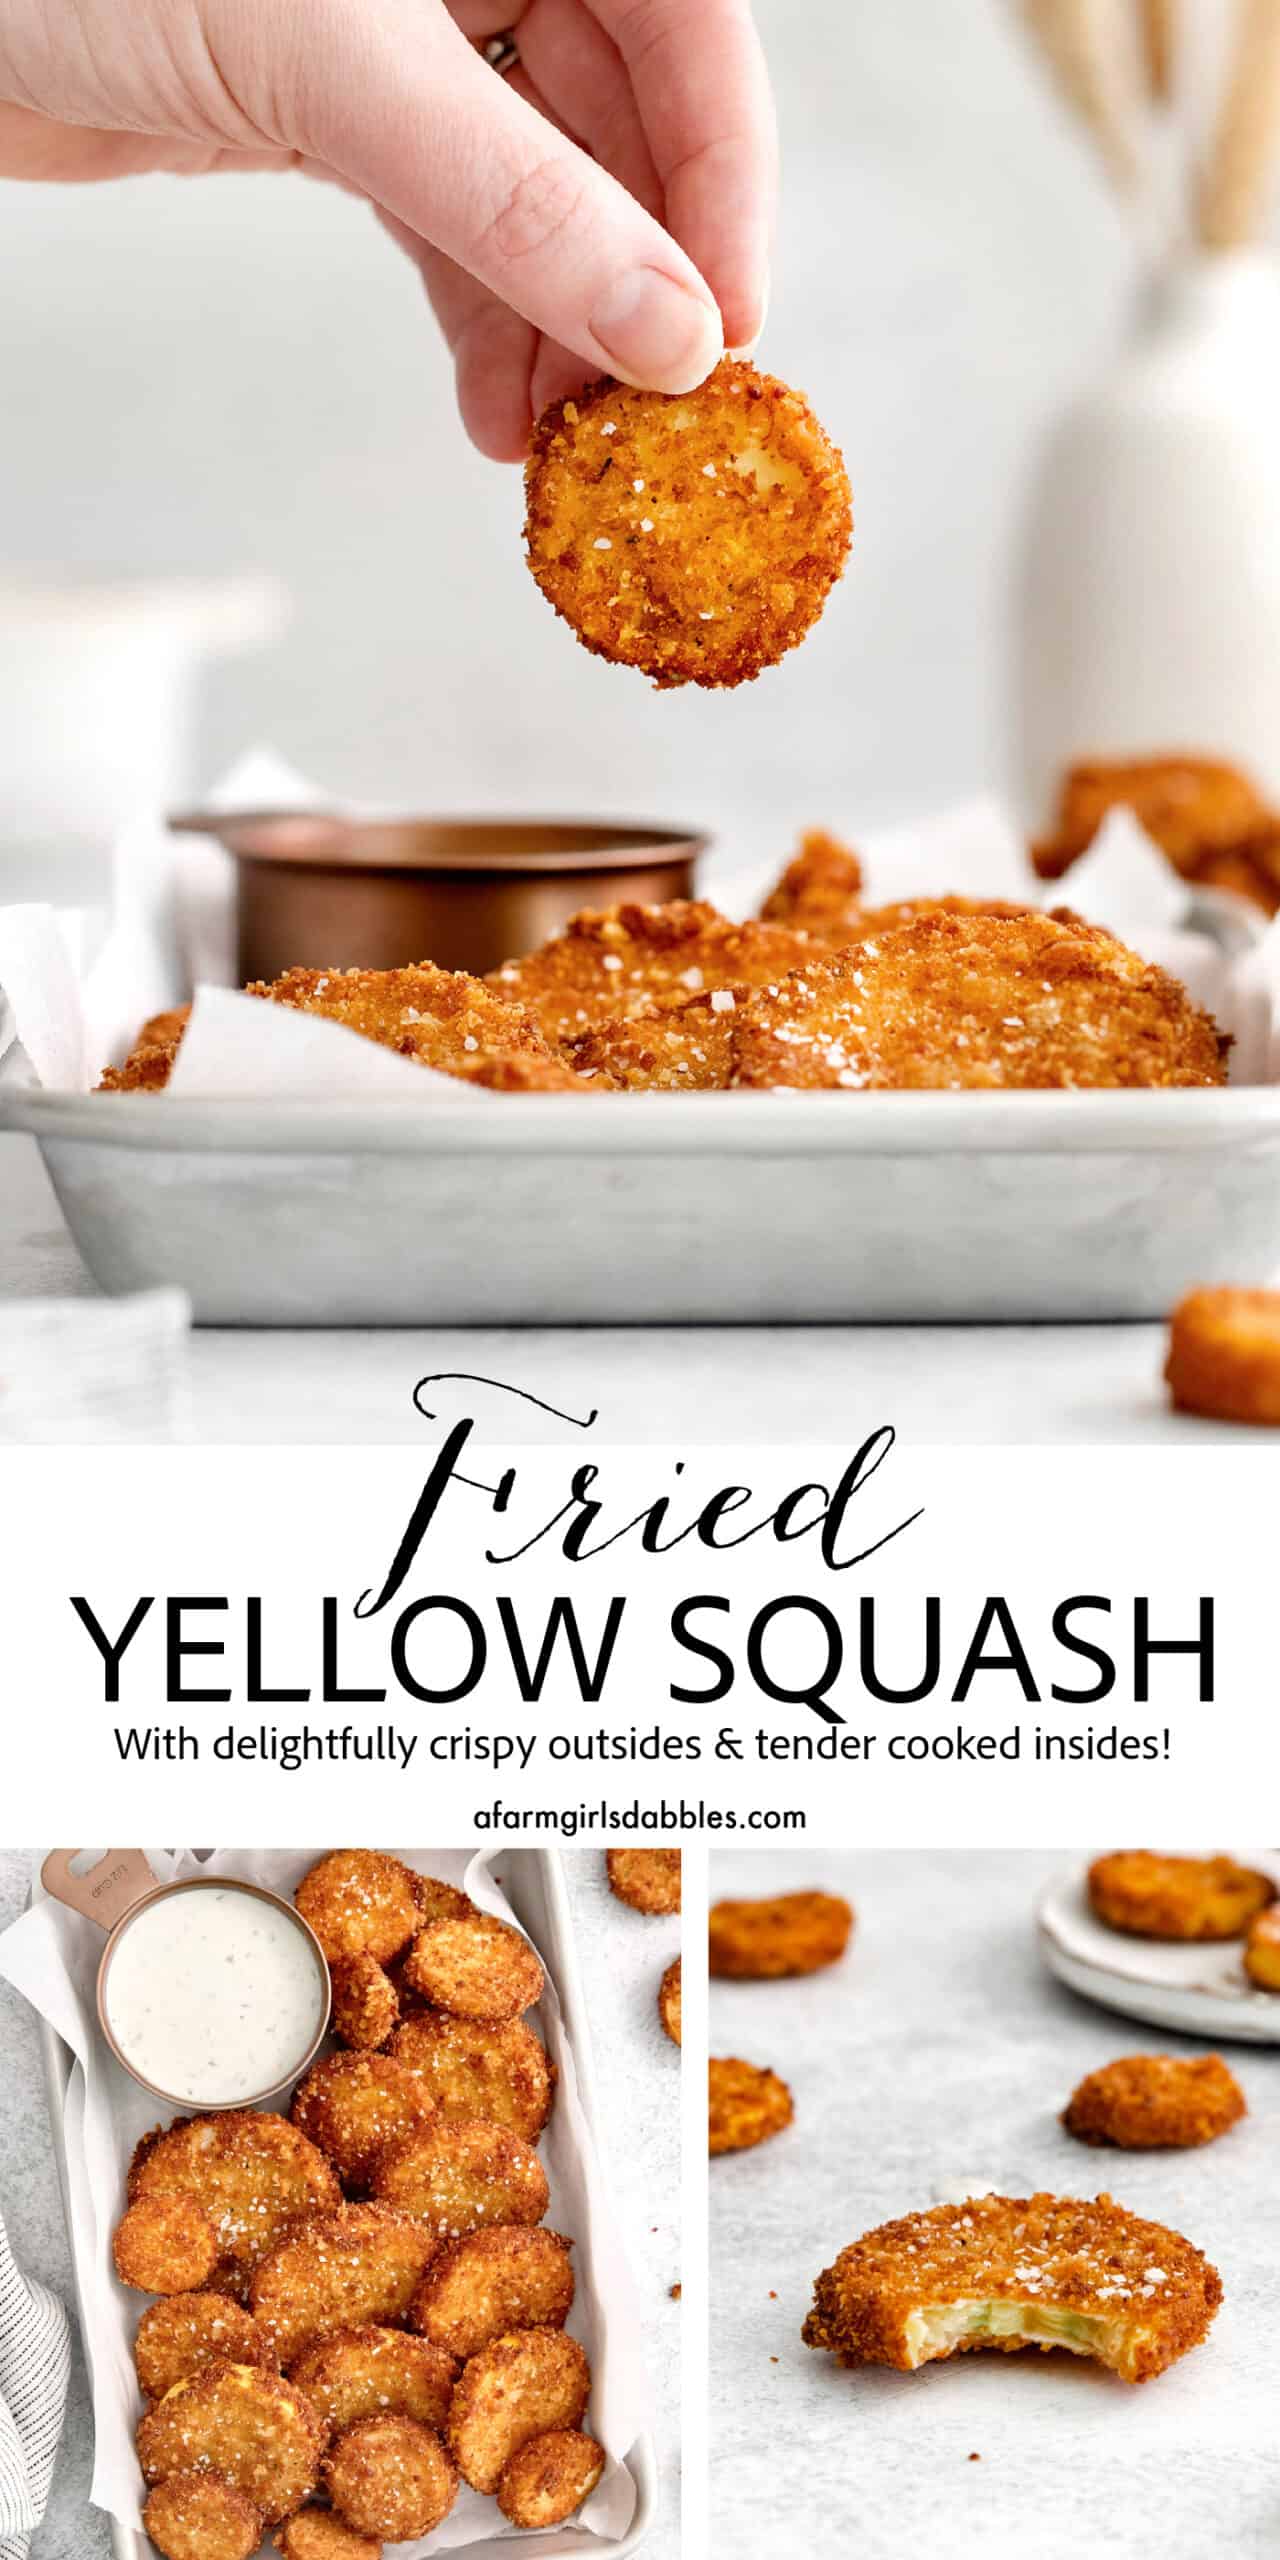 Pinterest image for fried yellow squash